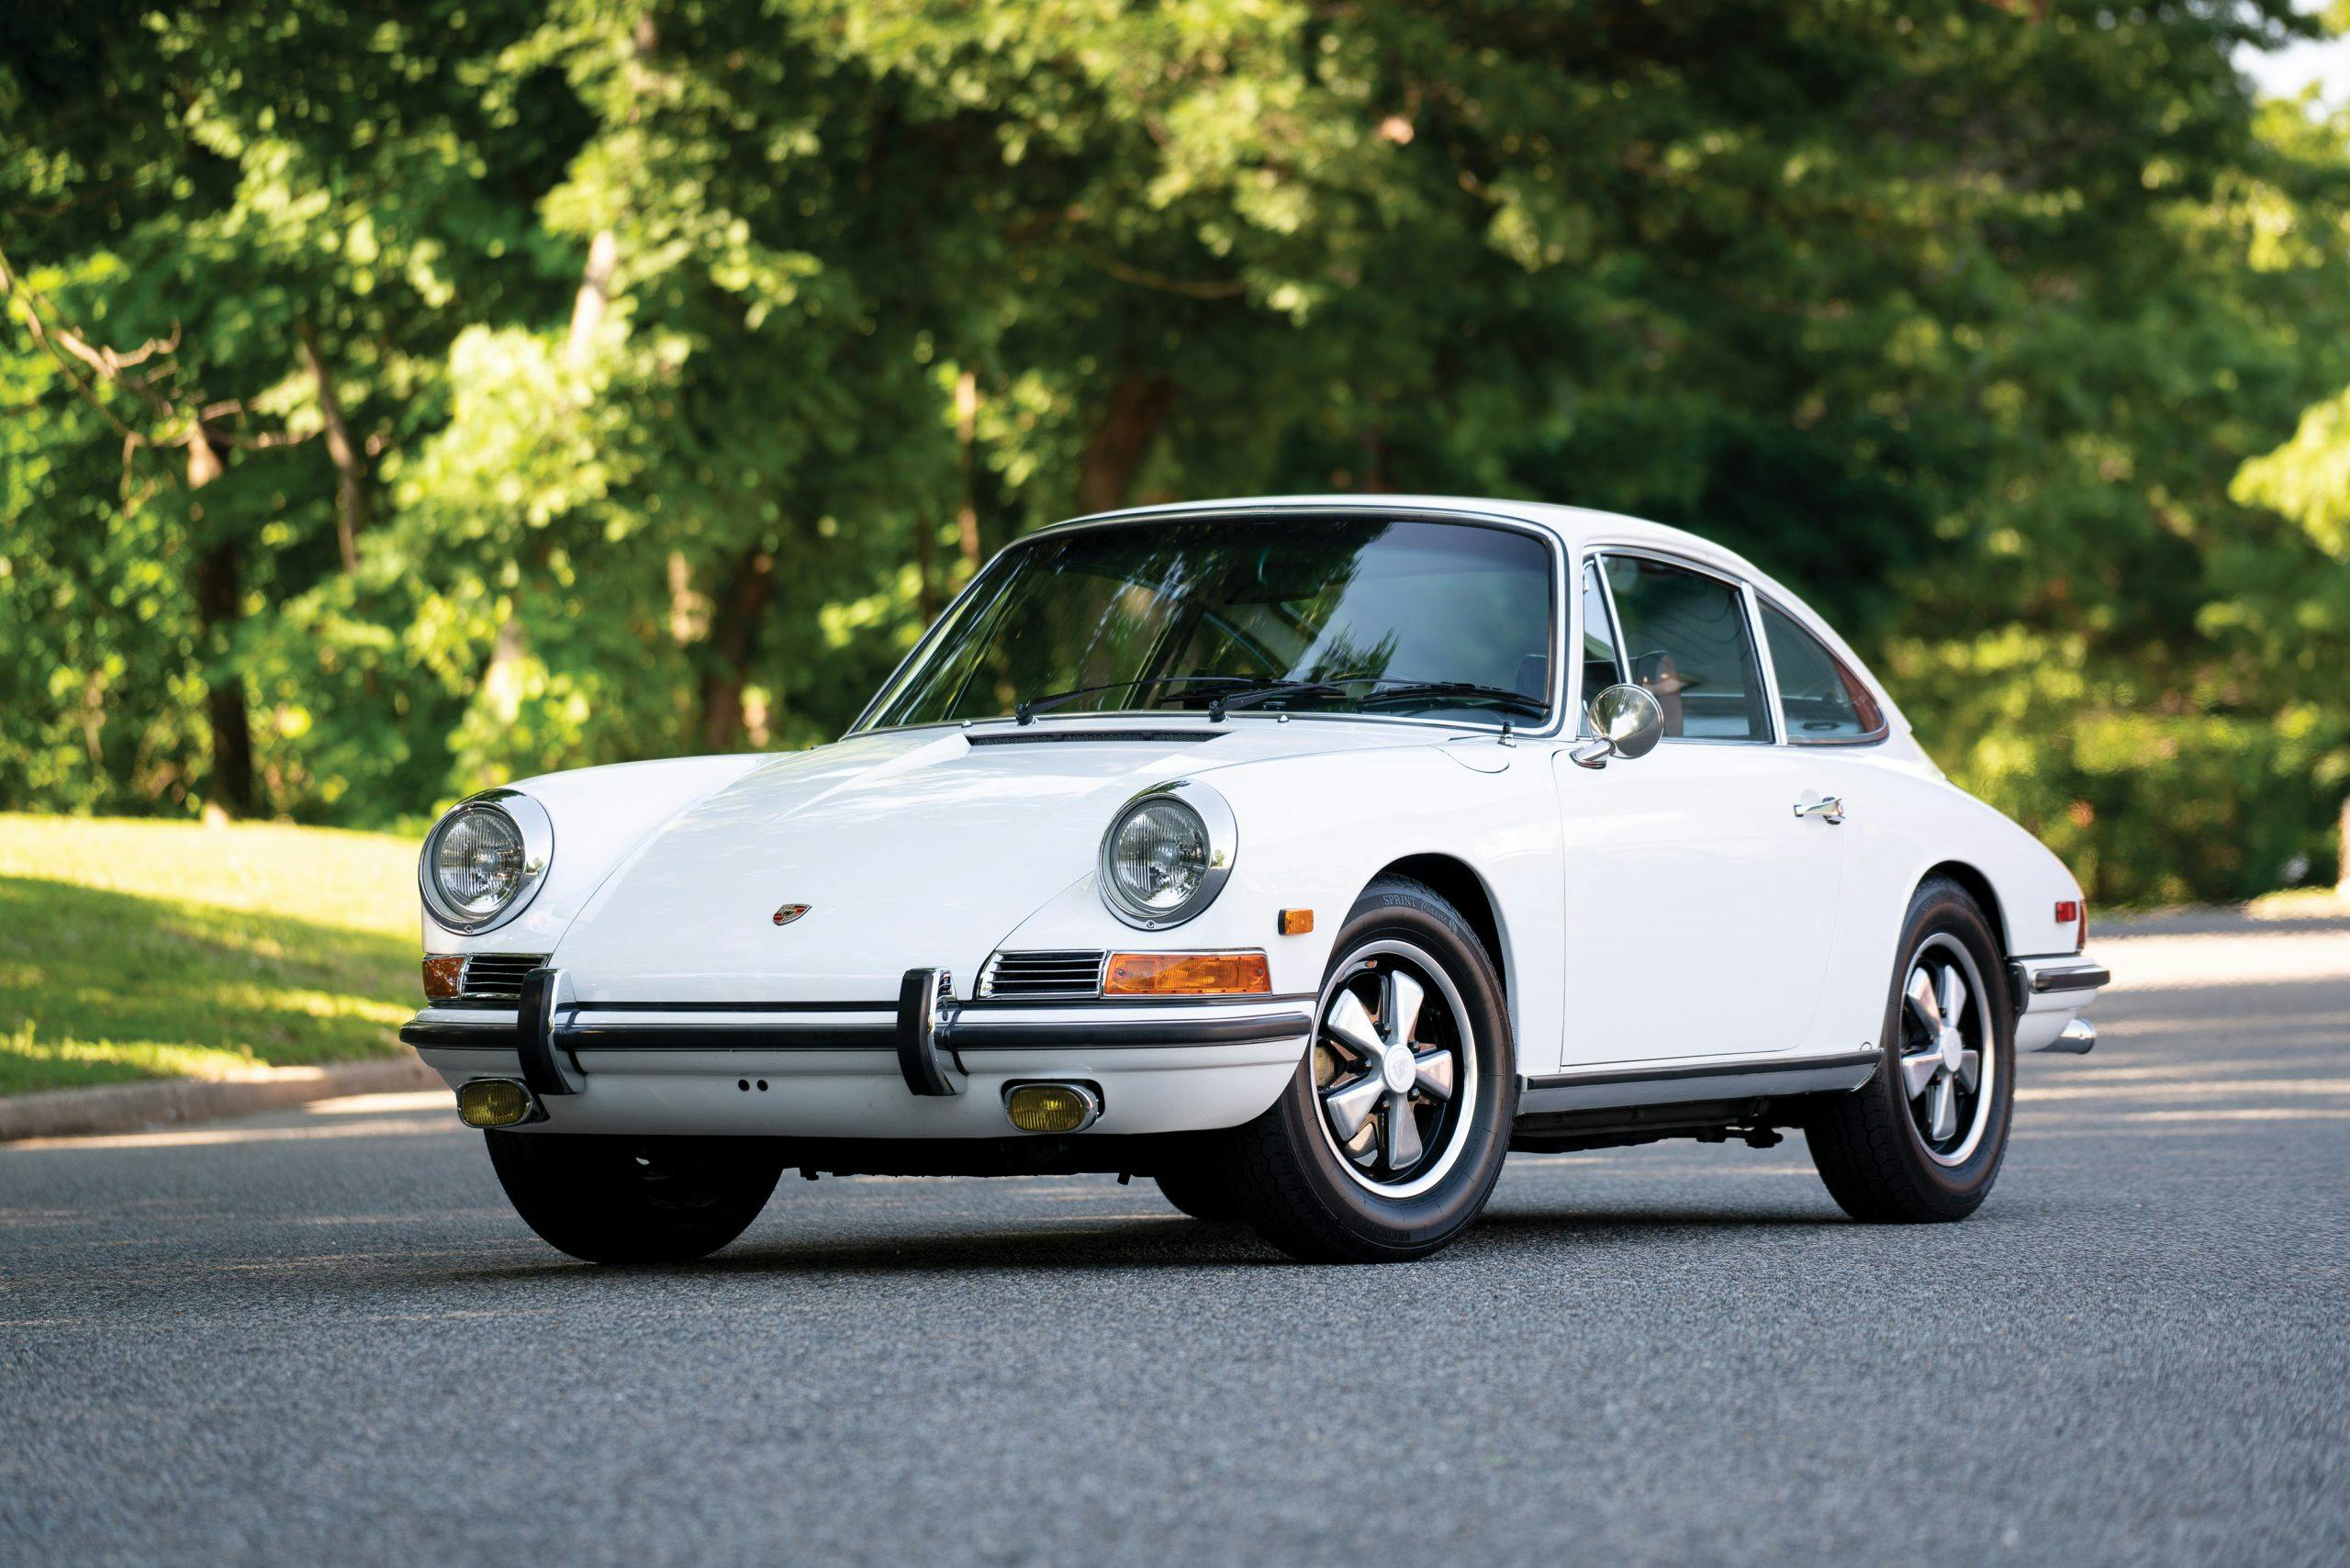 Heat check: The Porsche 911 market is still cooking - Hagerty Media